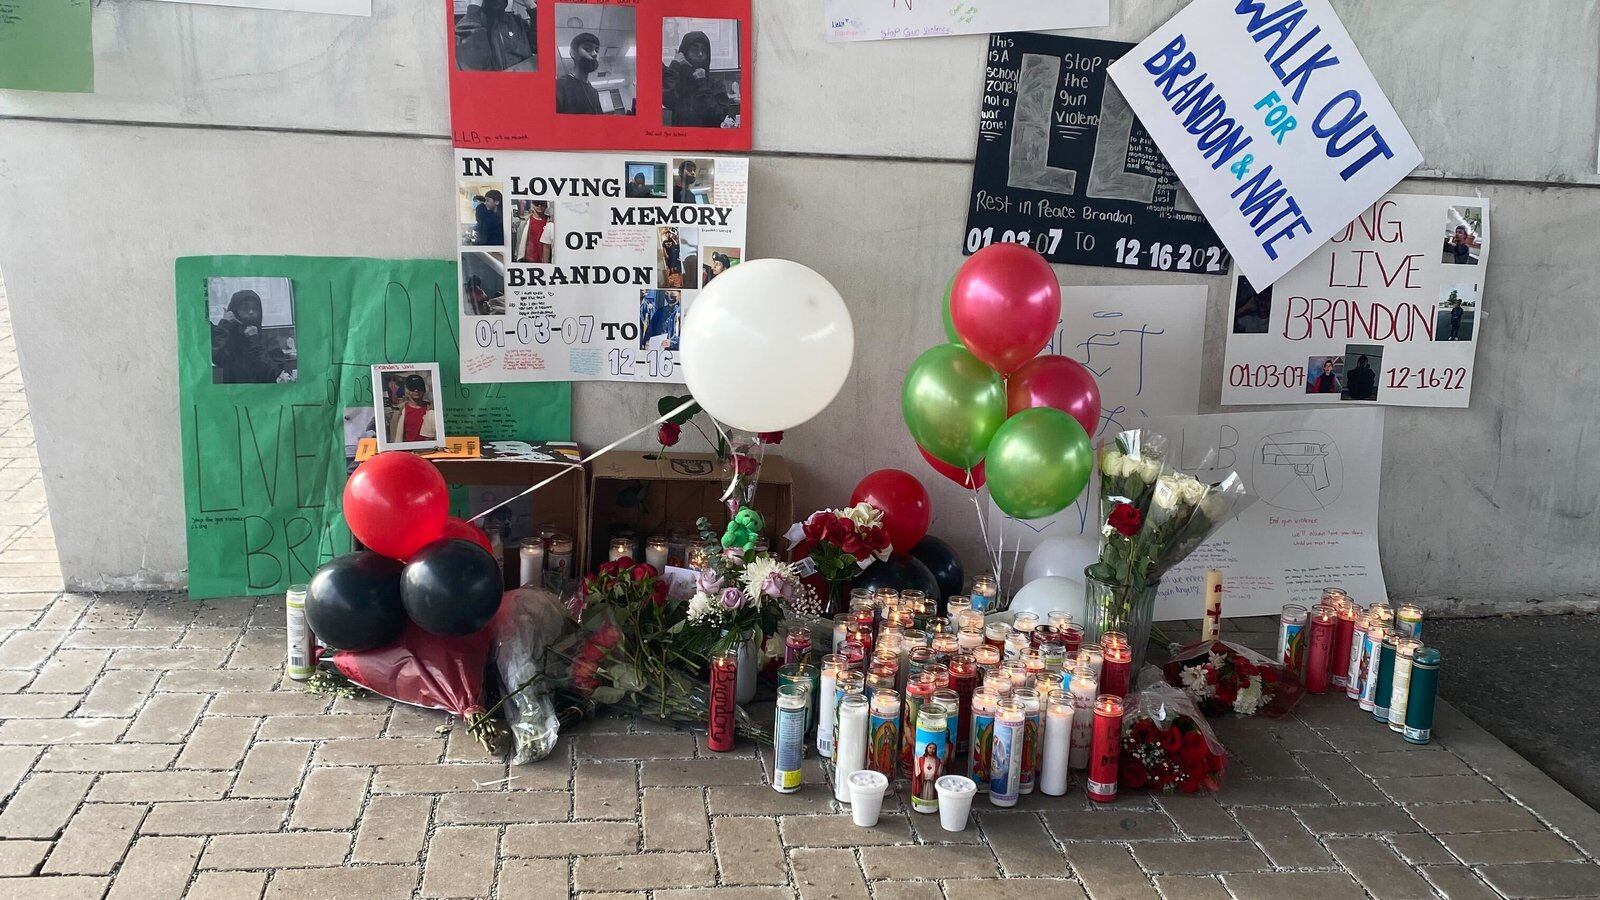 Signs mentioning Brandon Perez and Nathan Billegas hang on the wall. On the ground, there are balloons, candles, and flowers for a memorial to the two students at Benito Juarez High School in Chicago.